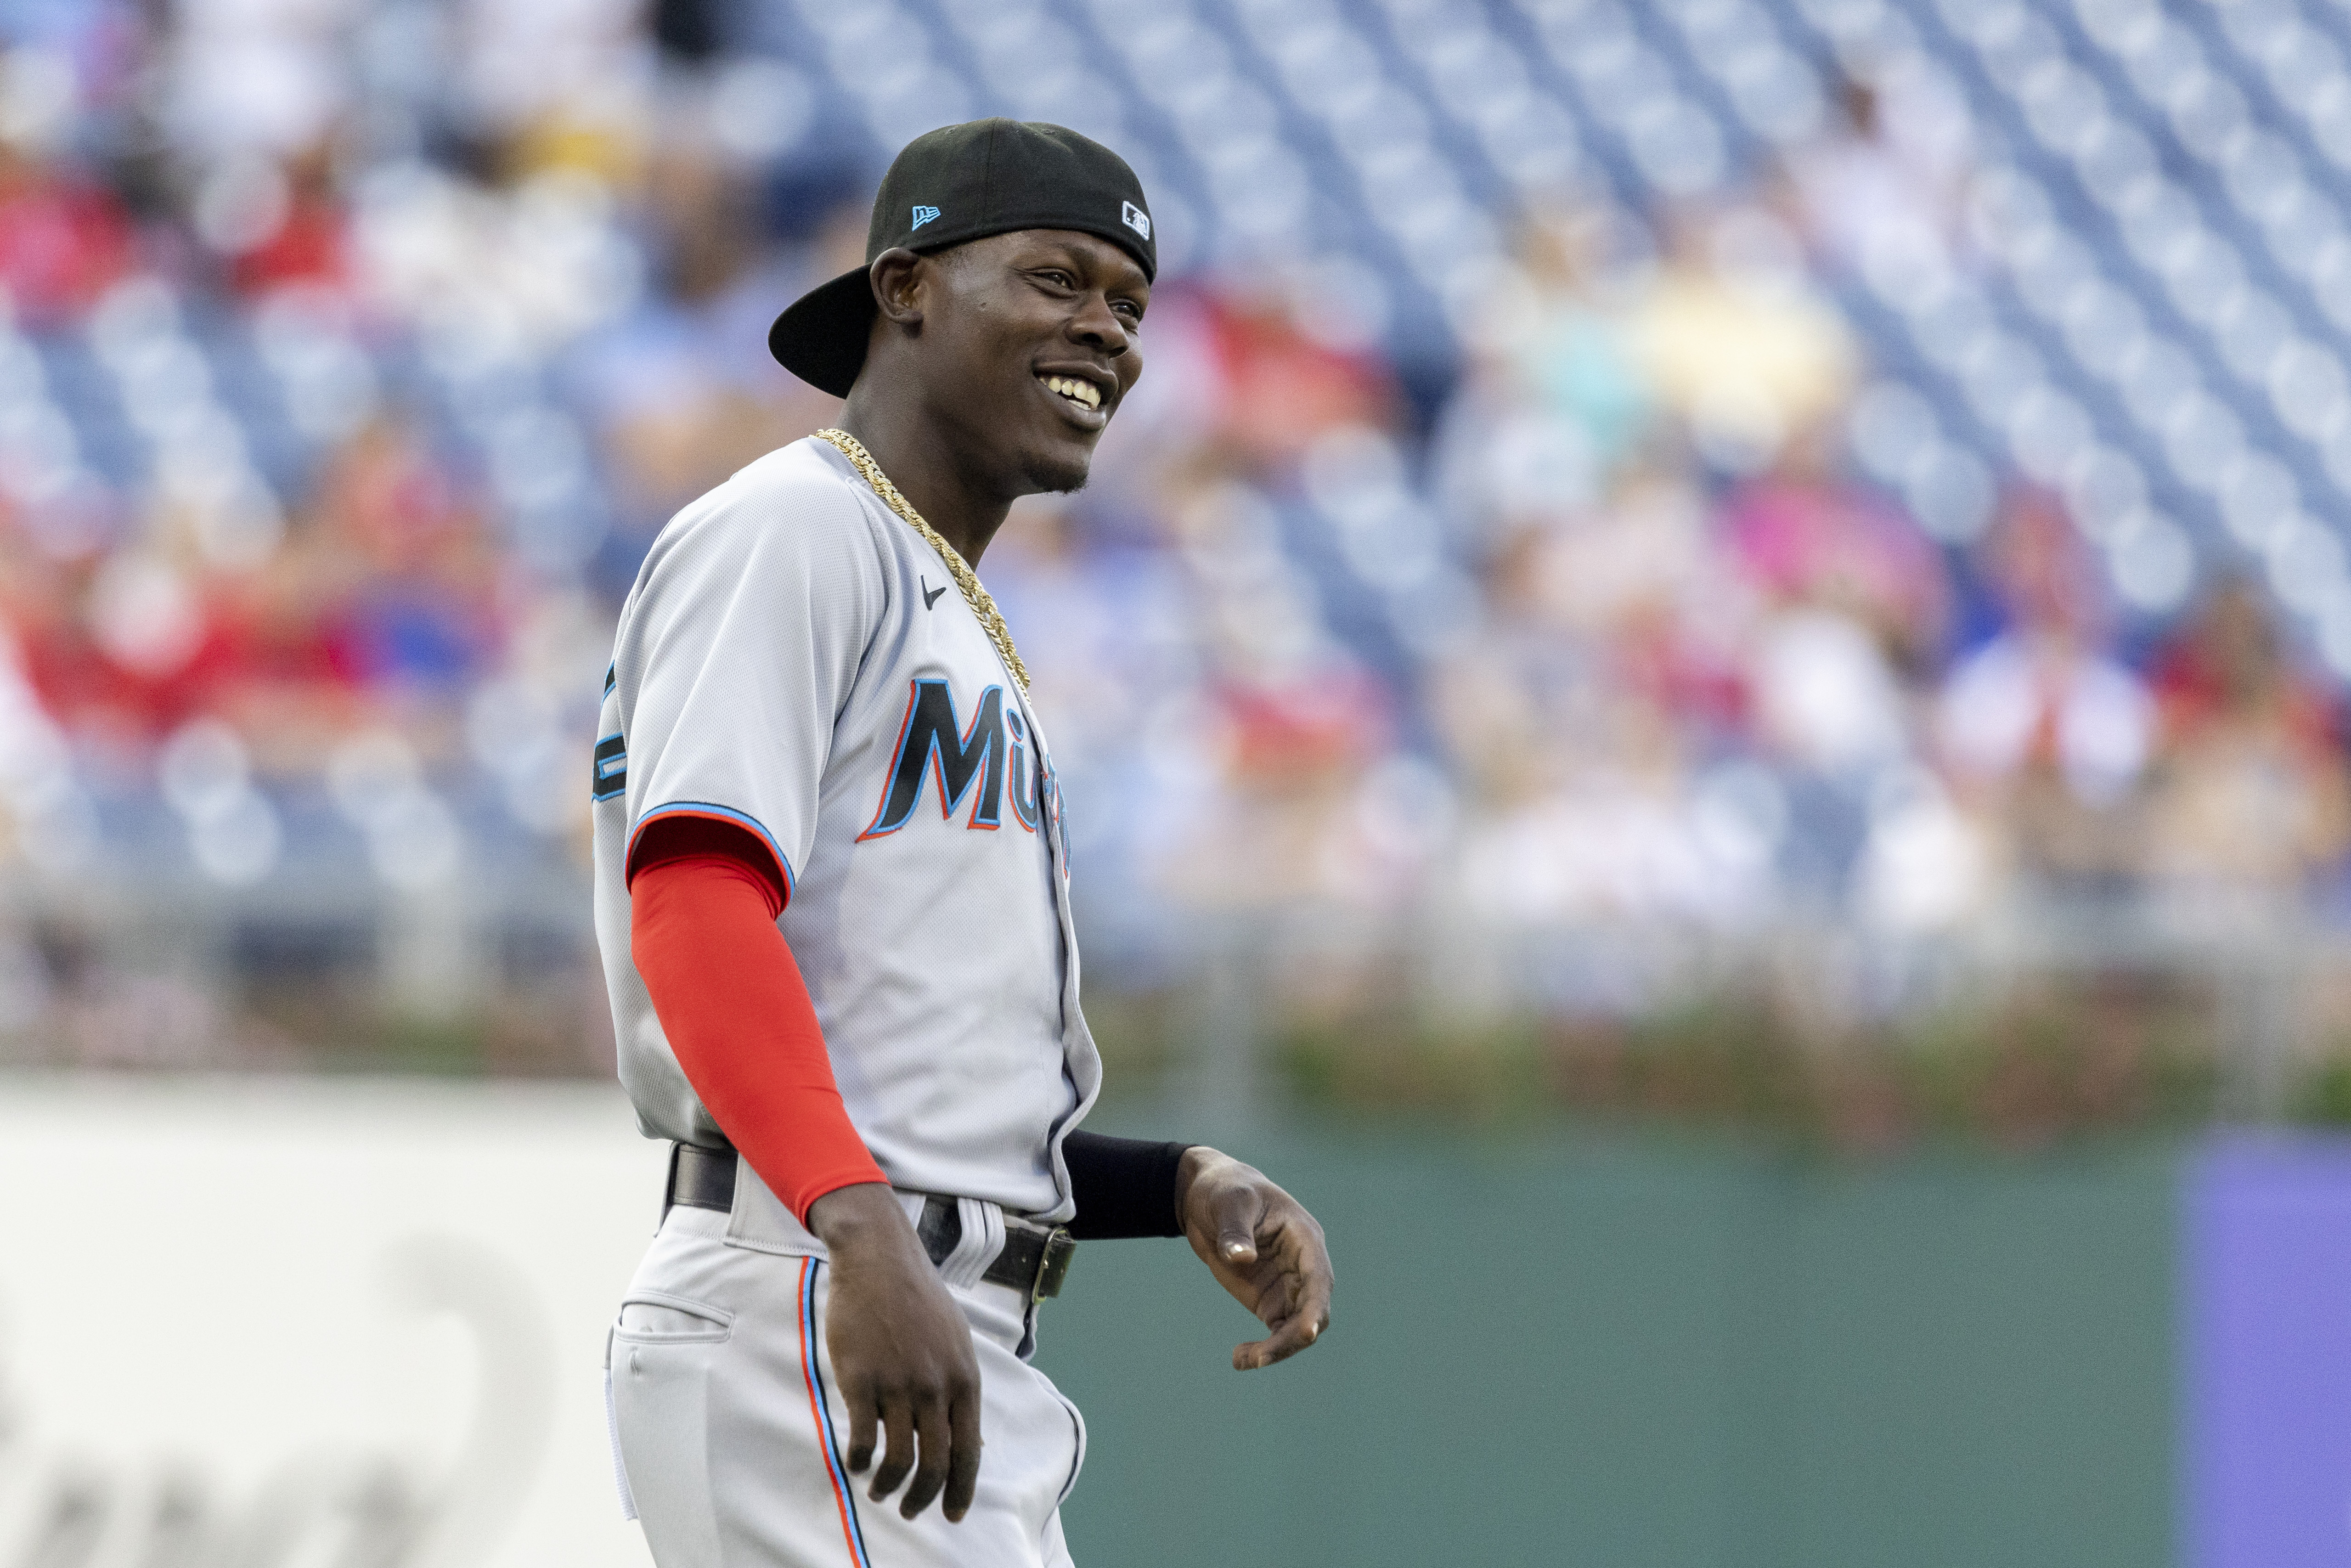 Marlins' Jazz Chisholm Jr. back on injured list, this time with